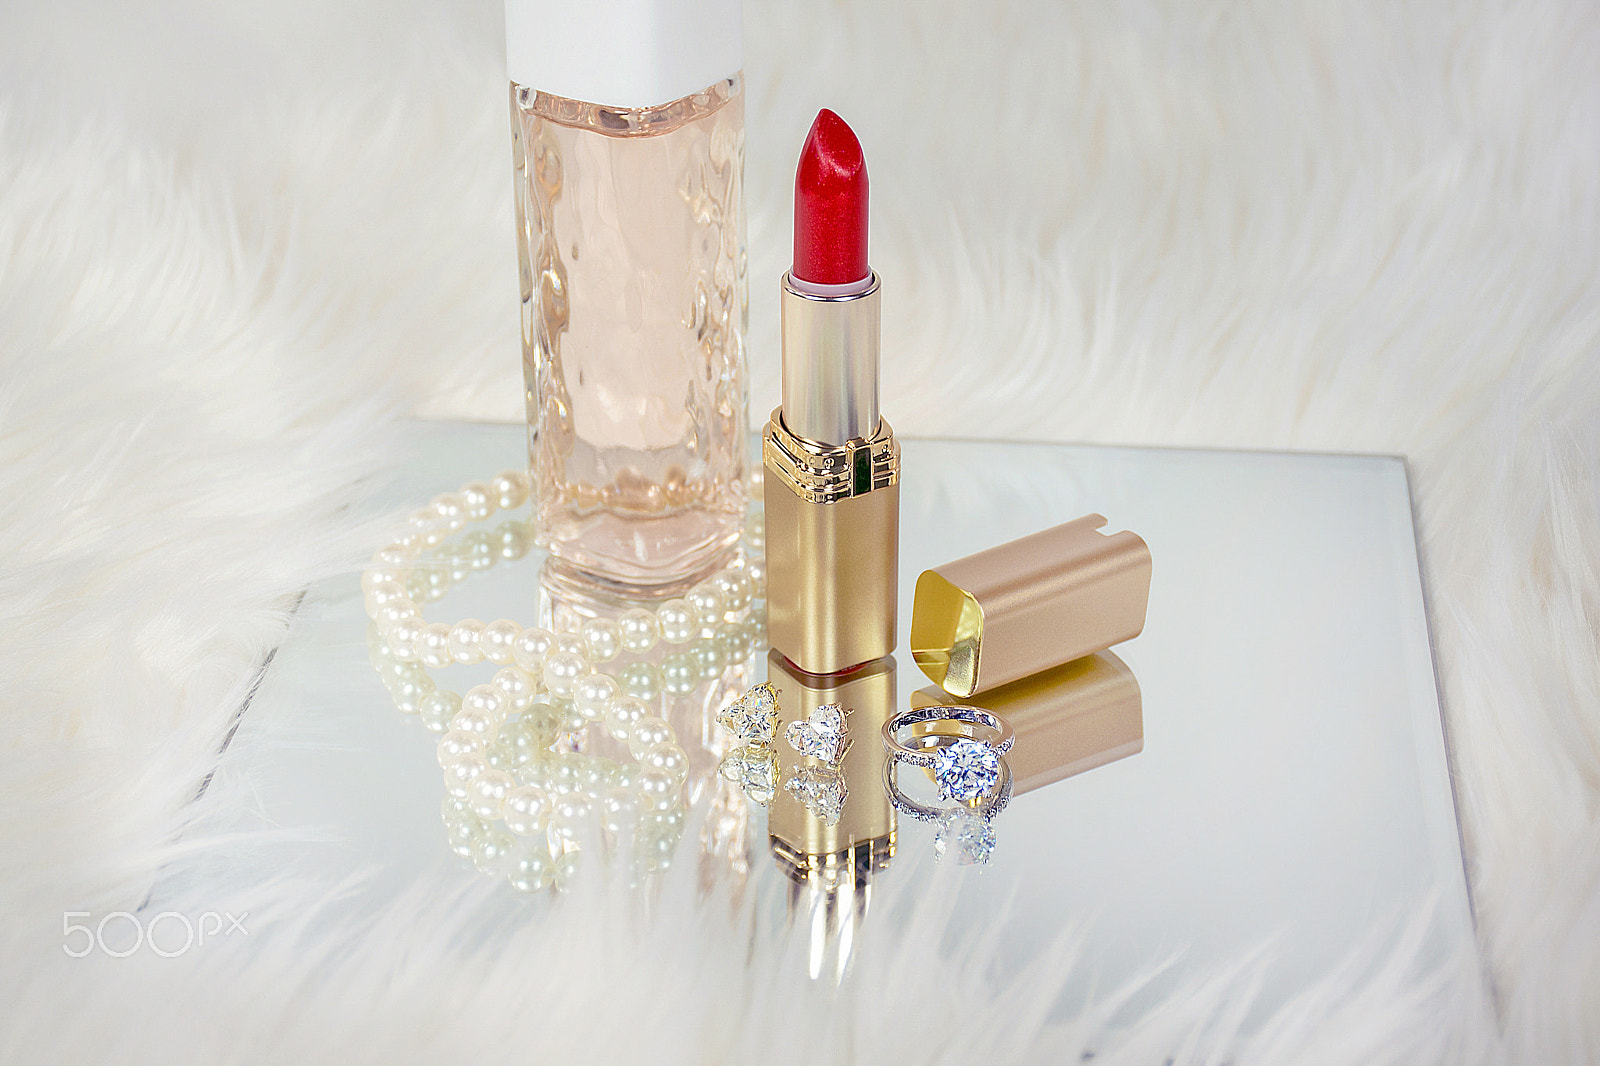 Nikon D750 sample photo. Red lipstick and jewels photography